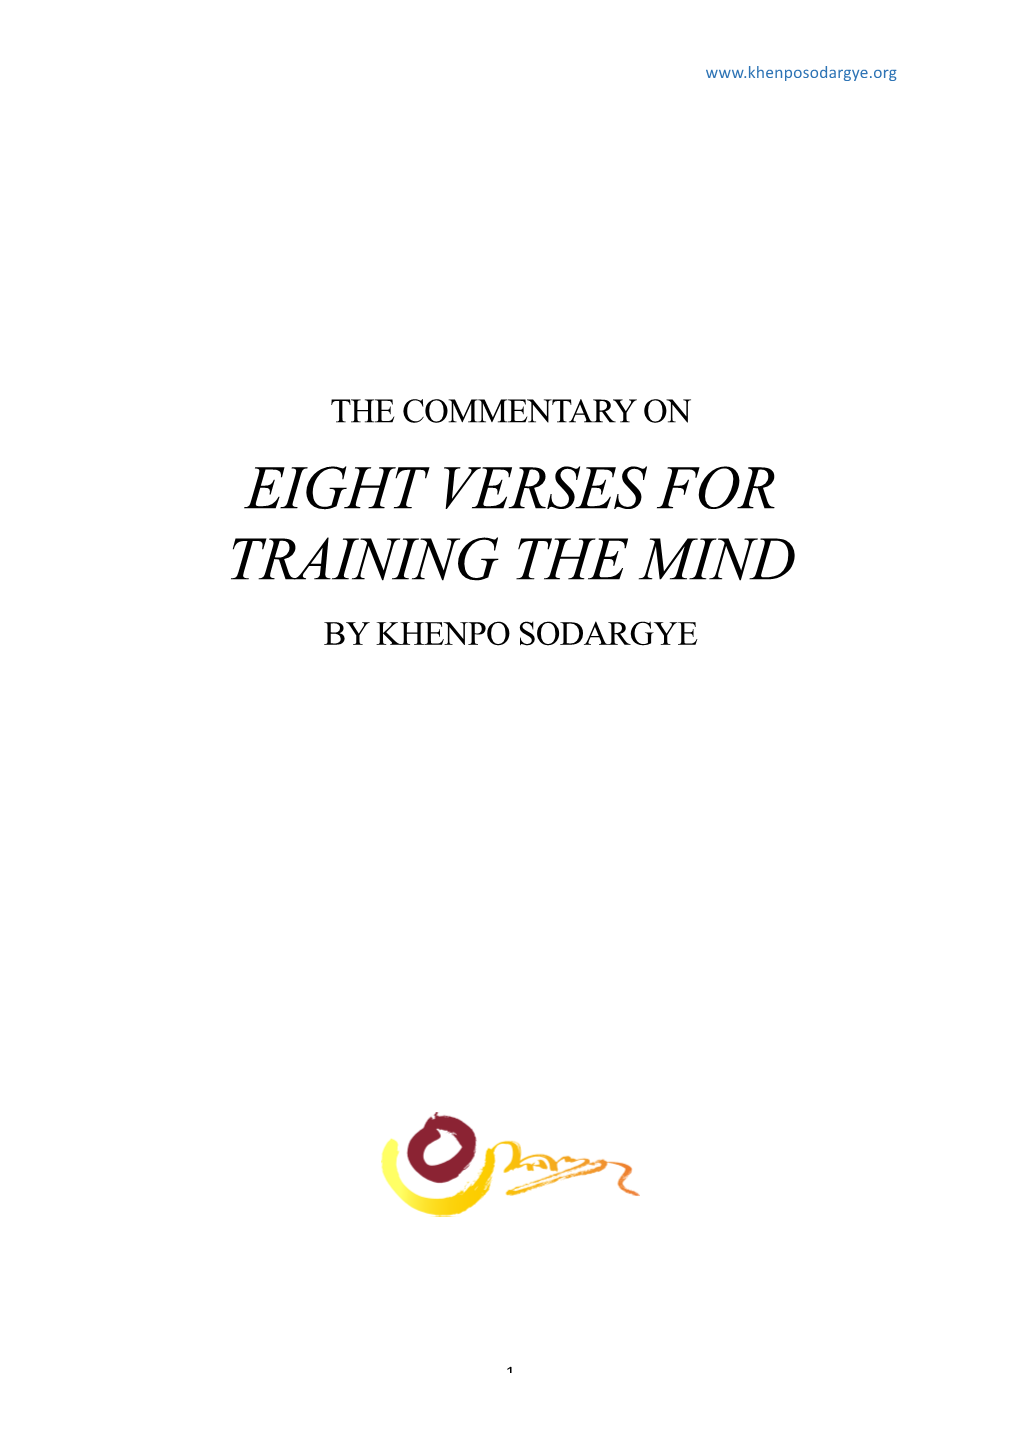 The Commentary on Eight Verses for Training the Mind by Khenpo Sodargye